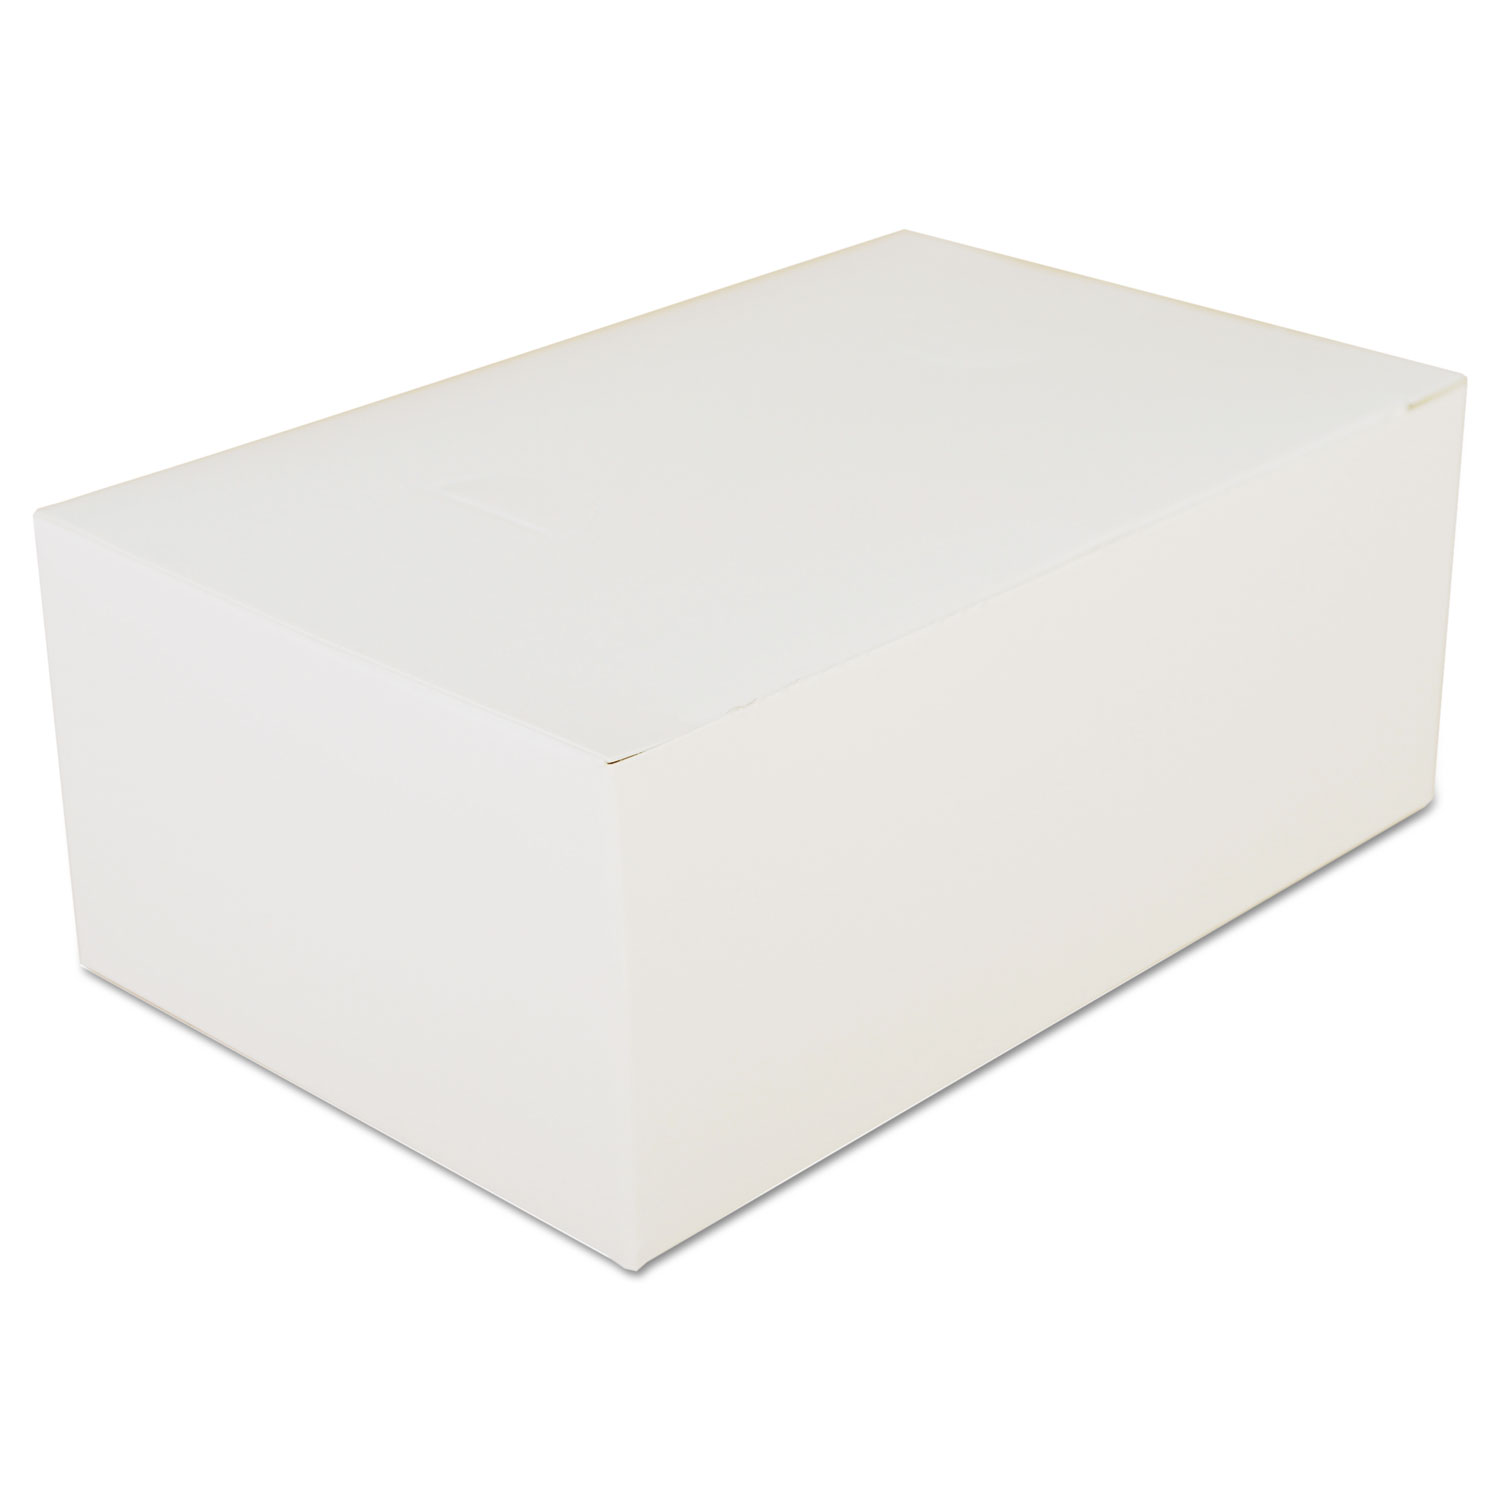  SCT SCH 2717 Carryout Tuck Top Boxes, White, 7 x 4 1/2 x 2 3/4, Paperboard, 500/Carton (SCH2717) 